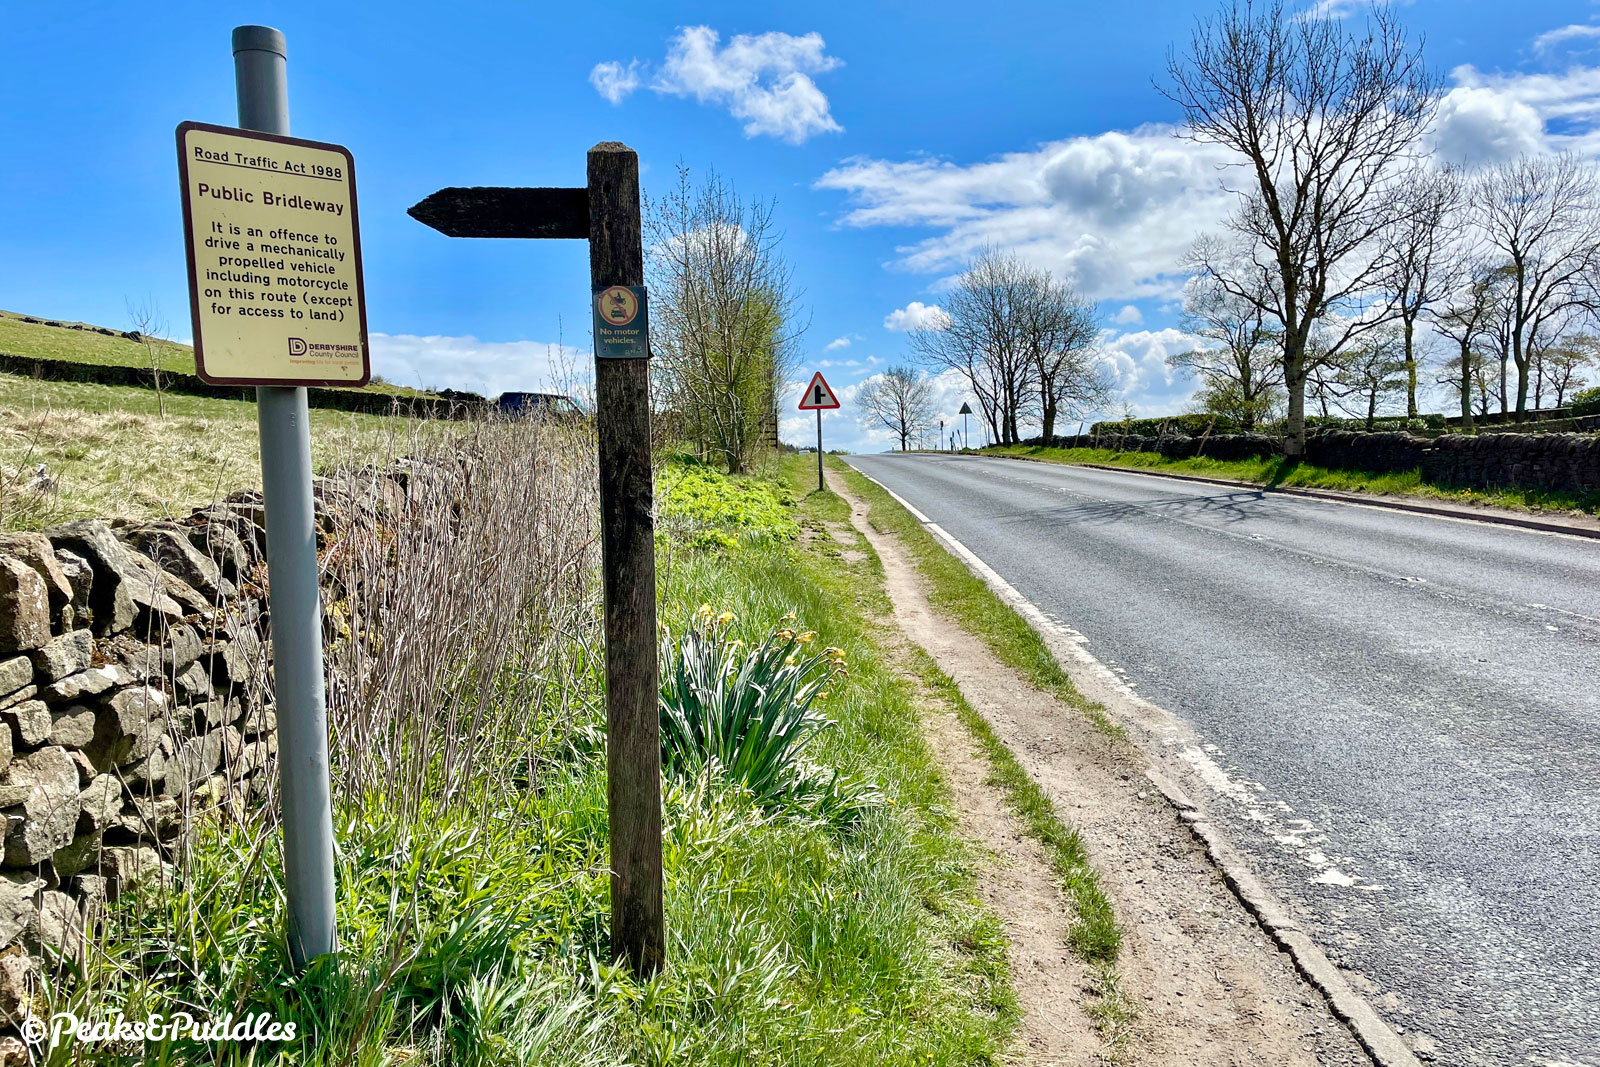 Where the bridleway joins the A624, a well-worn verge offers an easier route up to the right turn for Peep-O-Day — it wouldn't take much for Derbyshire County Council to make this an official link.